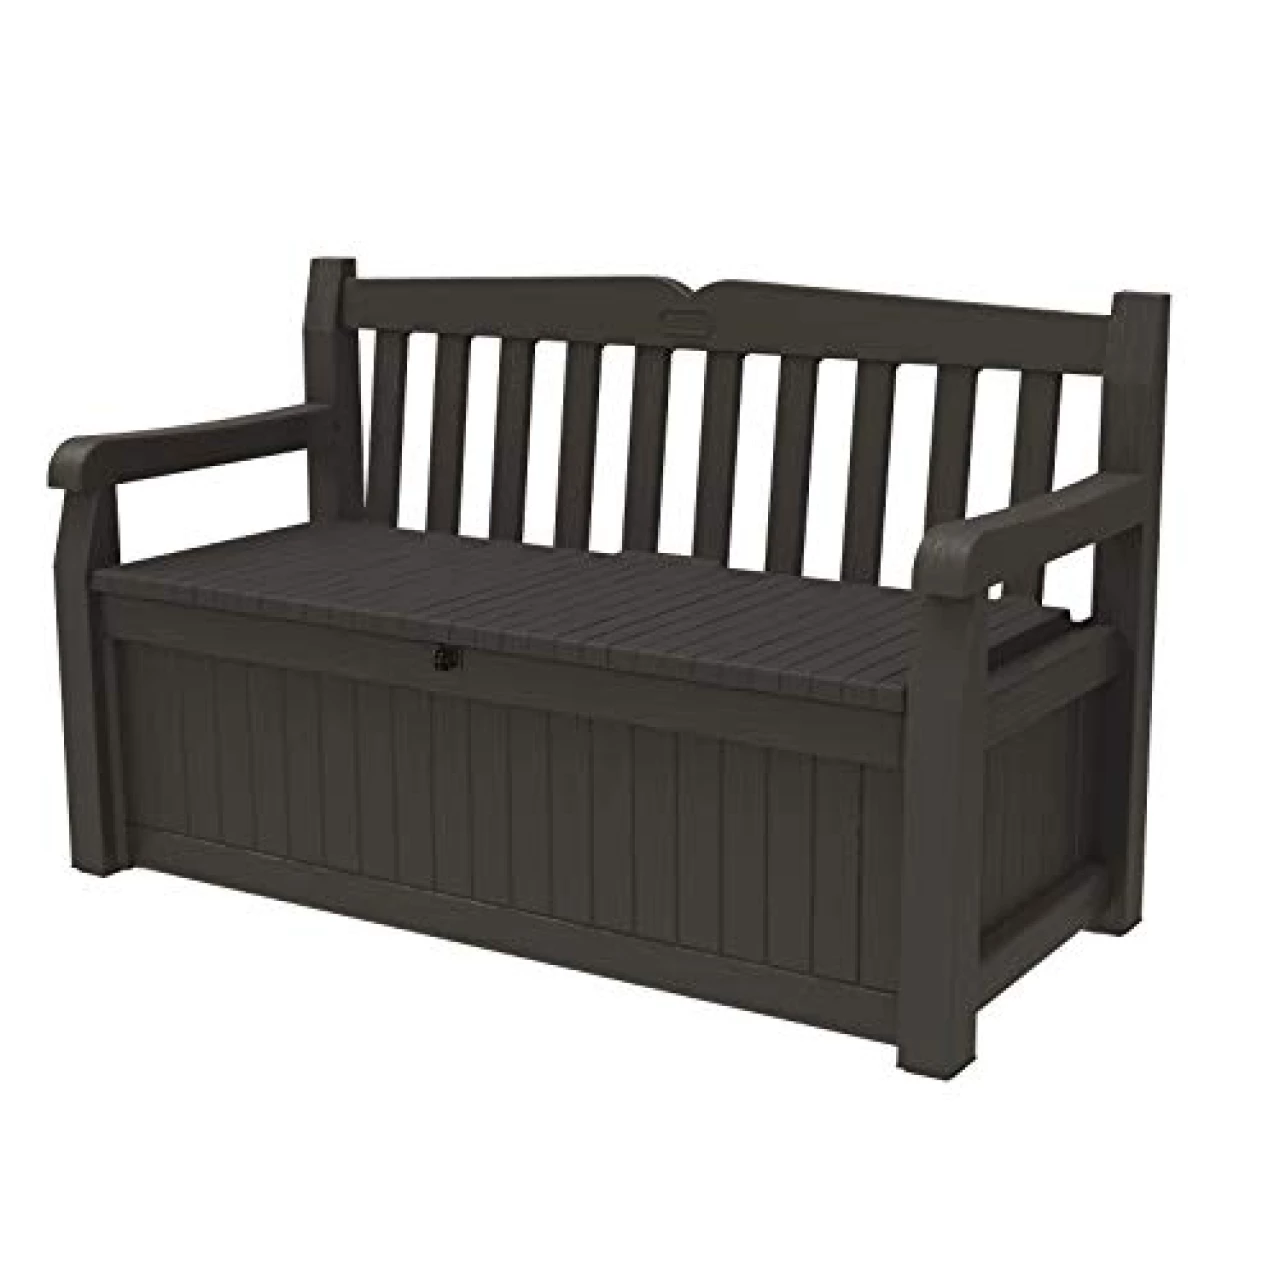 Keter Solana 70 Gallon Storage Bench Deck Box for Patio Furniture, Front Porch Decor and Outdoor Seating